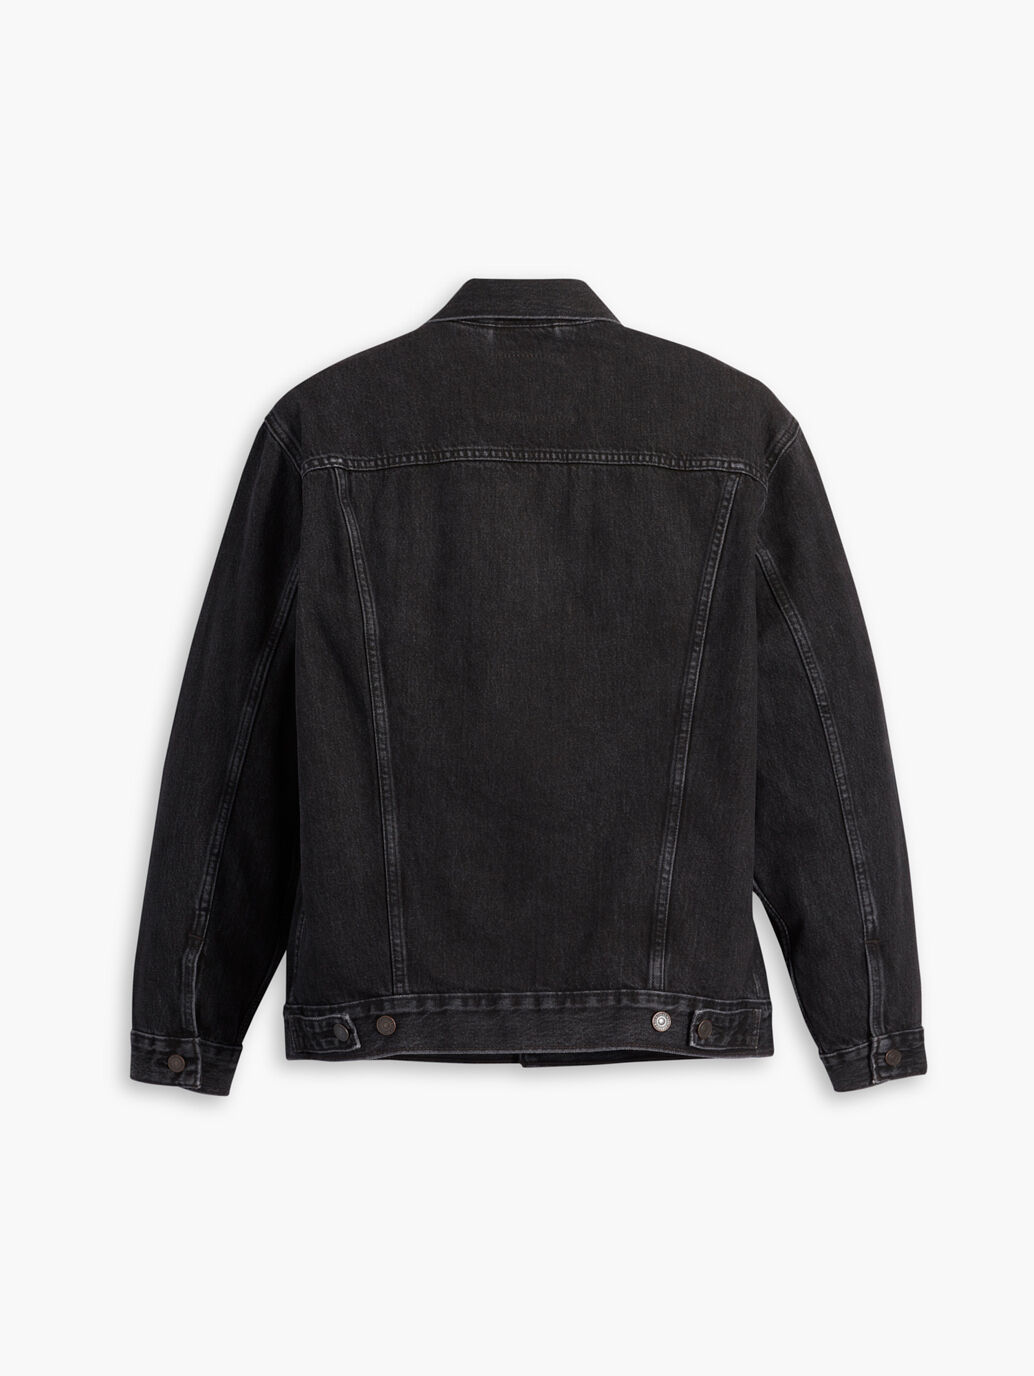 Black Relaxed Fit Trucker Jacket For Men - Premium Quality